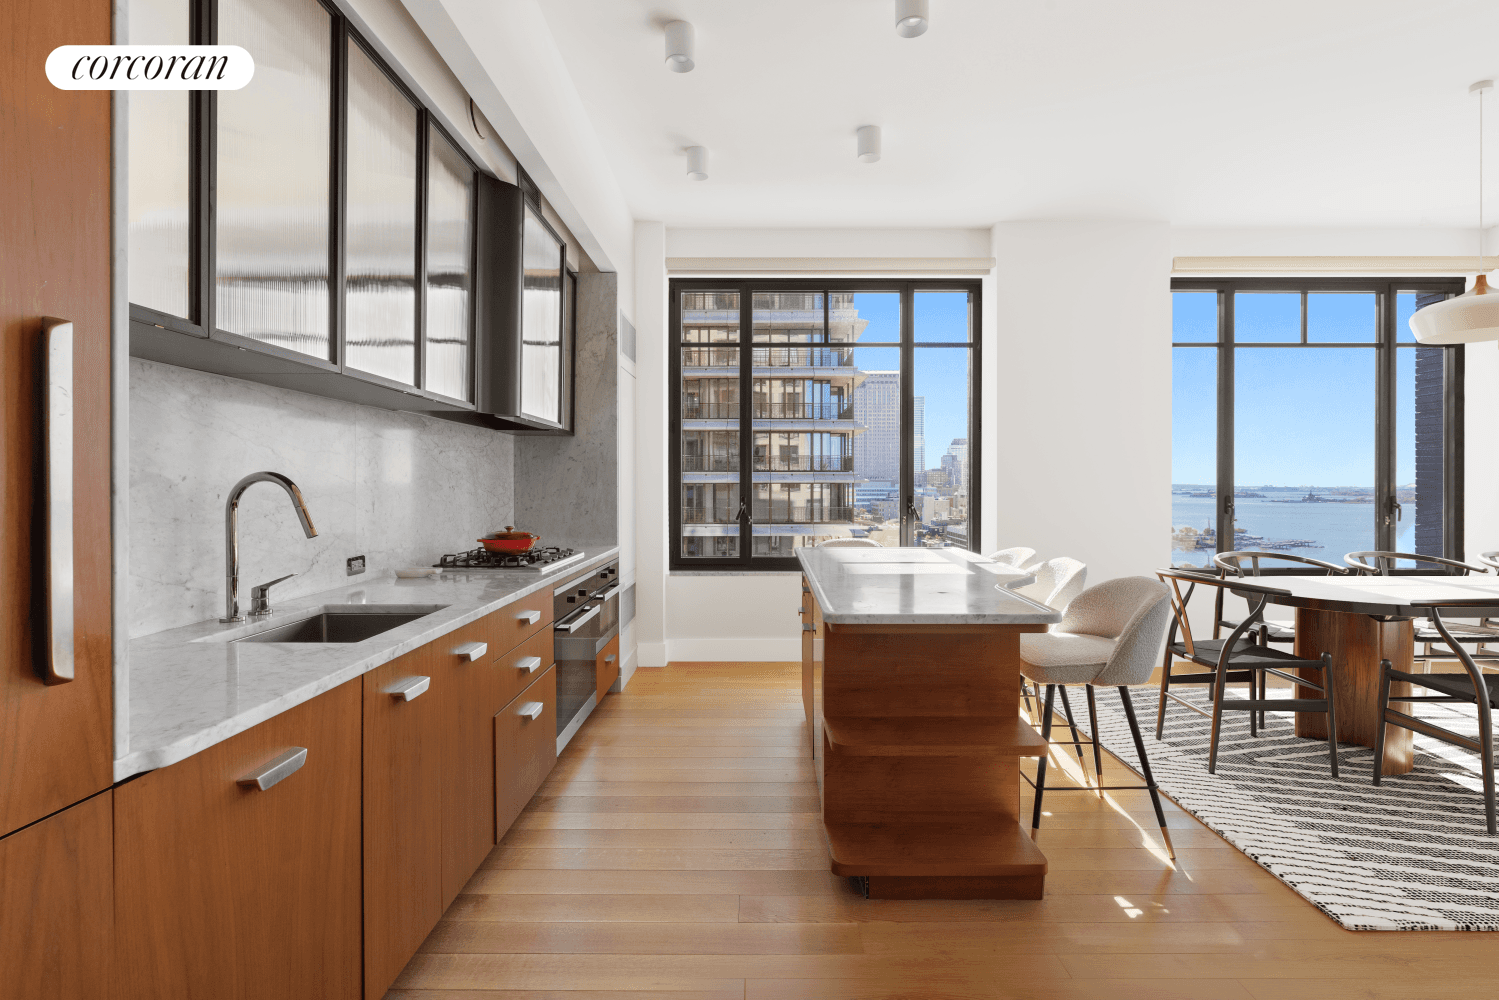 Terraced Home with Perfect Sunset Views over the Hudson River.